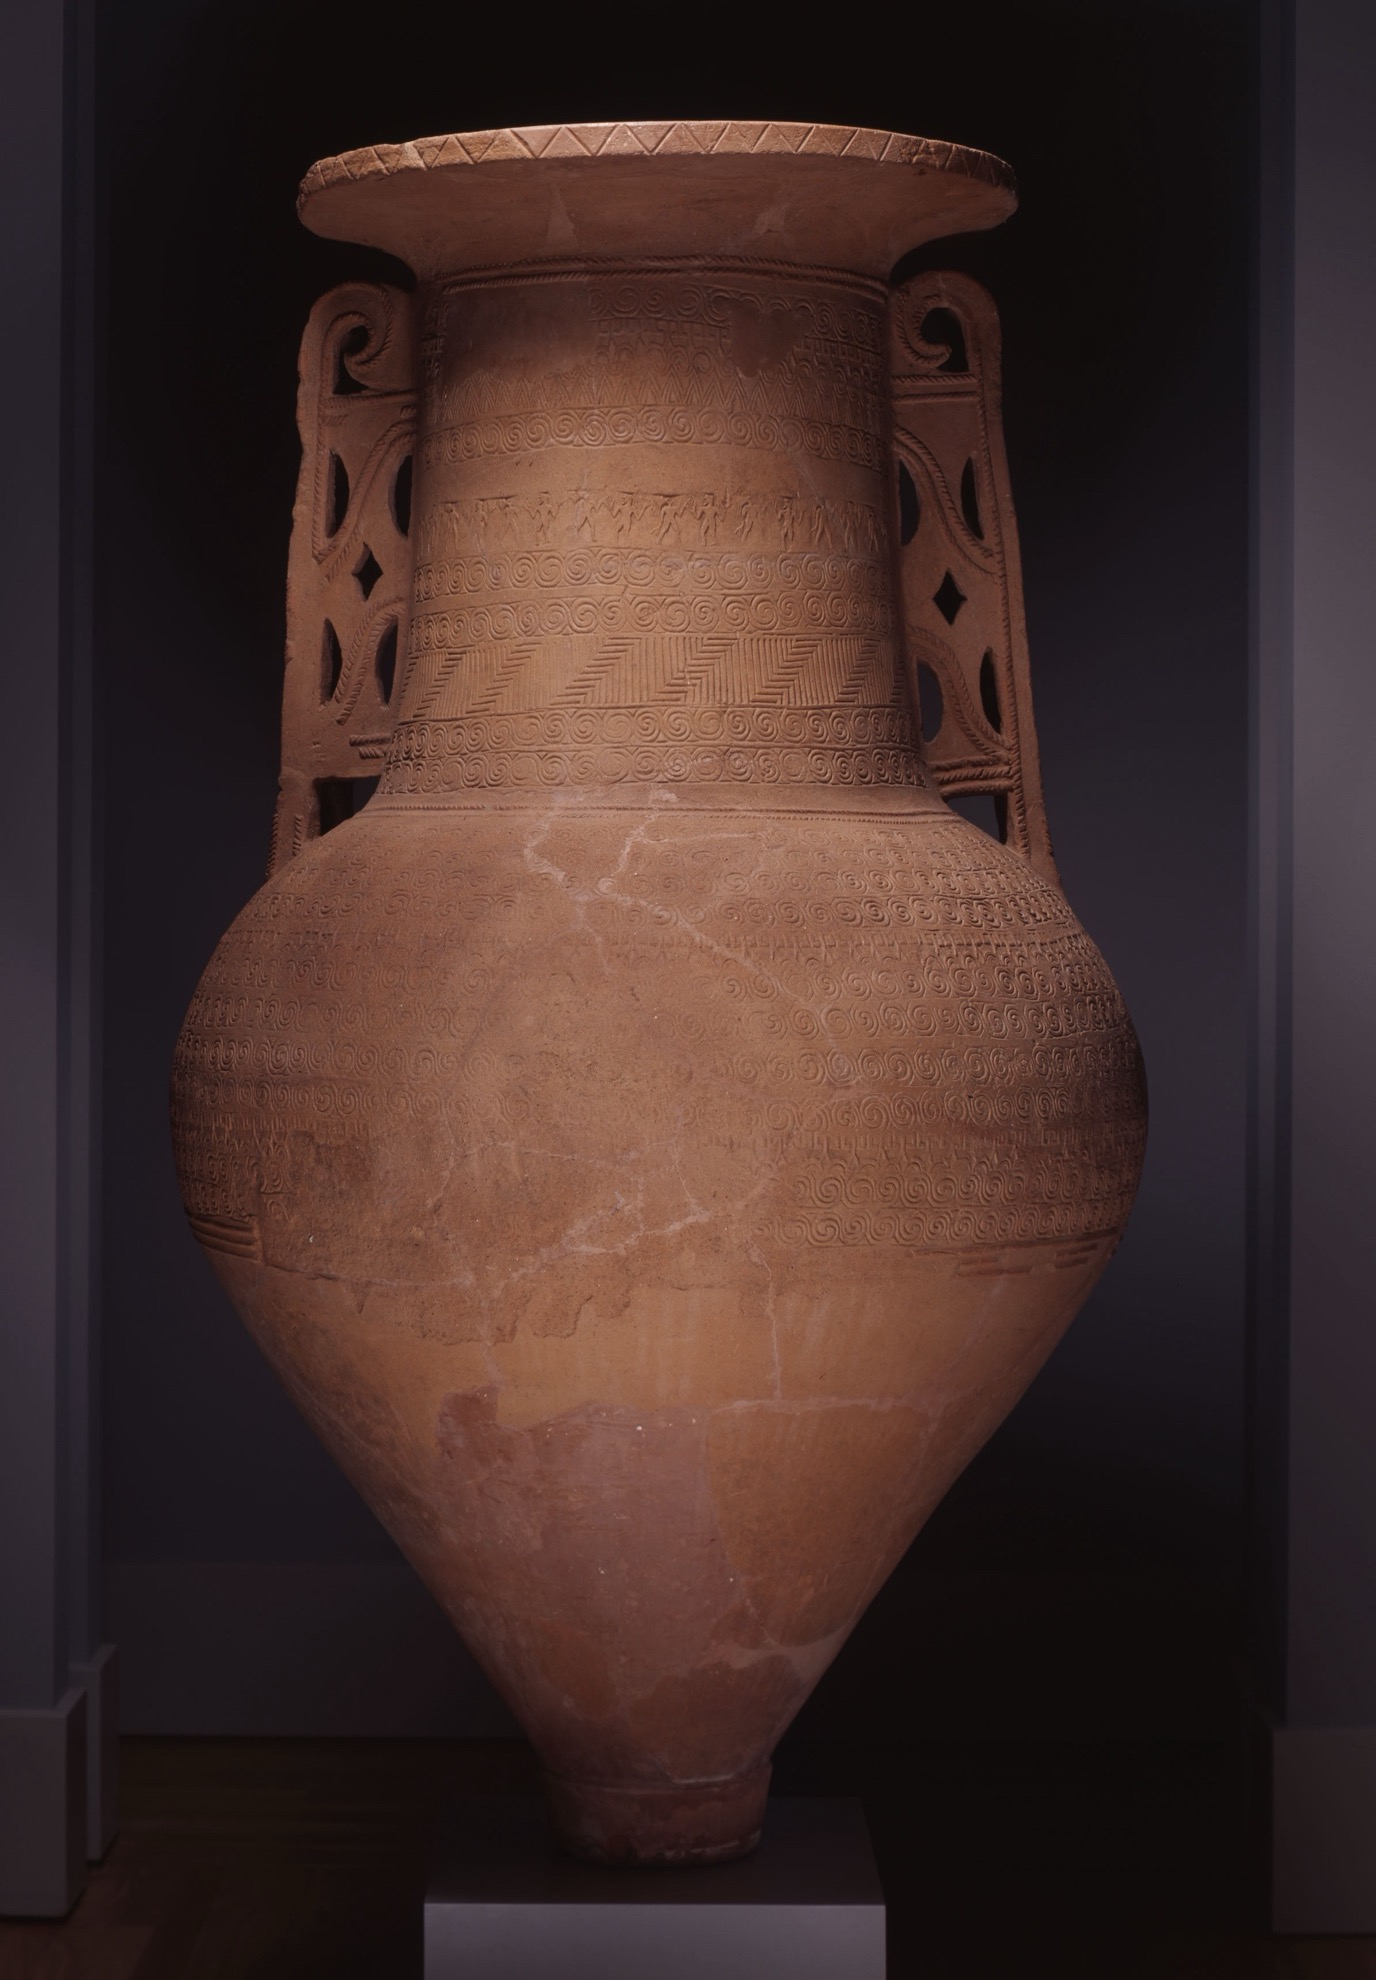 Pithos. Greek. Archaic, ca. 650-600 BCE. Ceramic. Carlos Collection of Ancient Art. 2004.2.1.